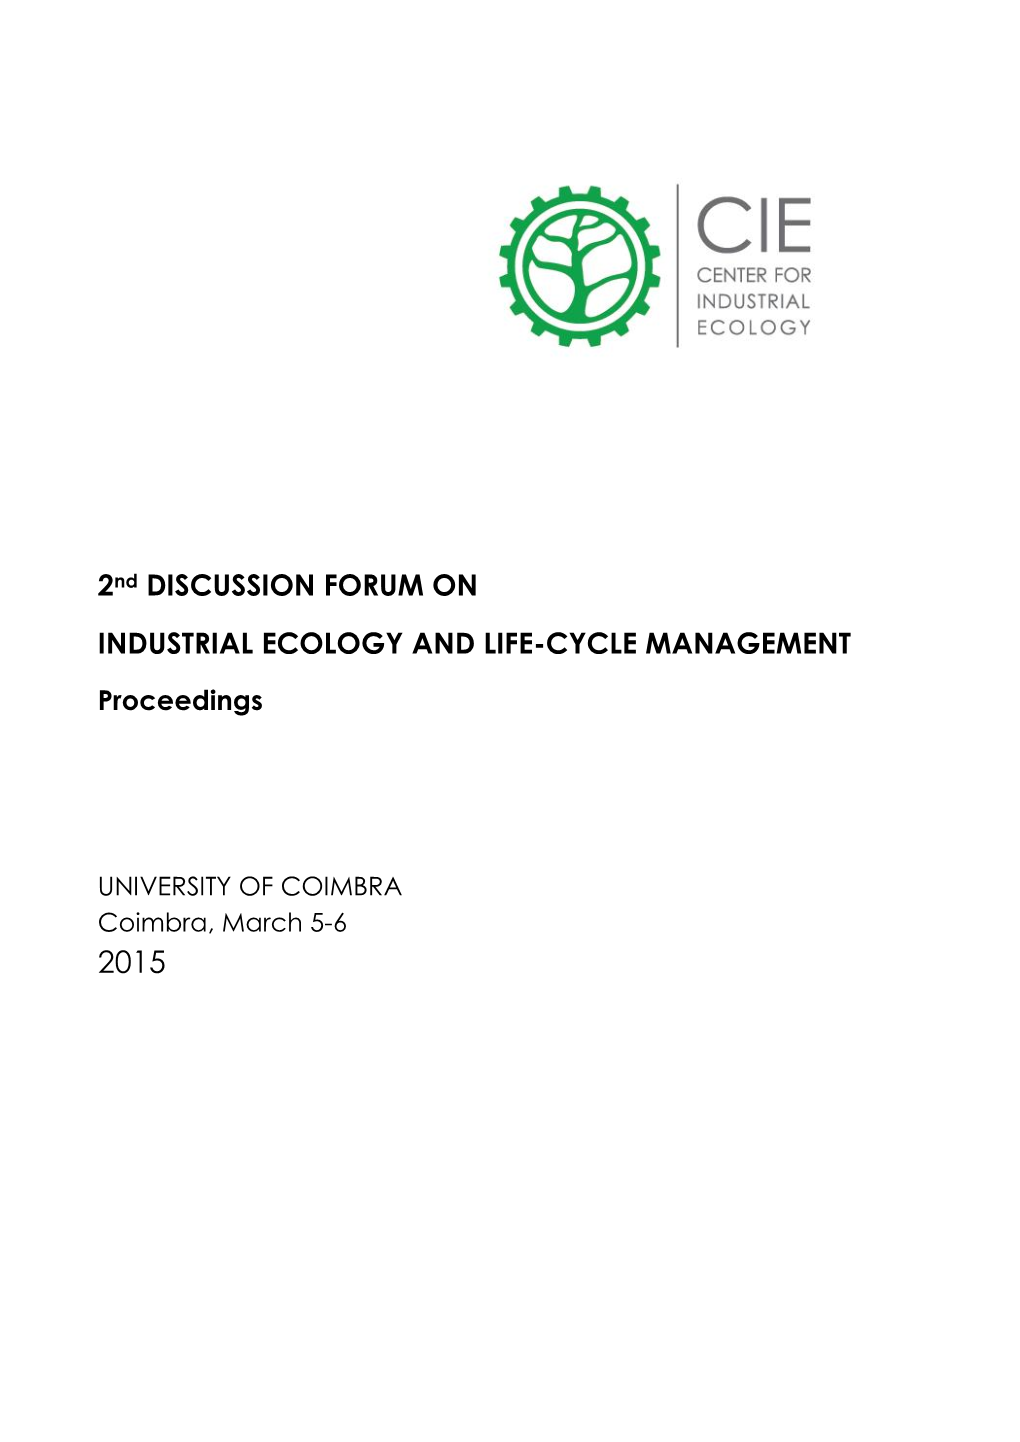 2Nd DISCUSSION FORUM on INDUSTRIAL ECOLOGY and LIFE-CYCLE MANAGEMENT